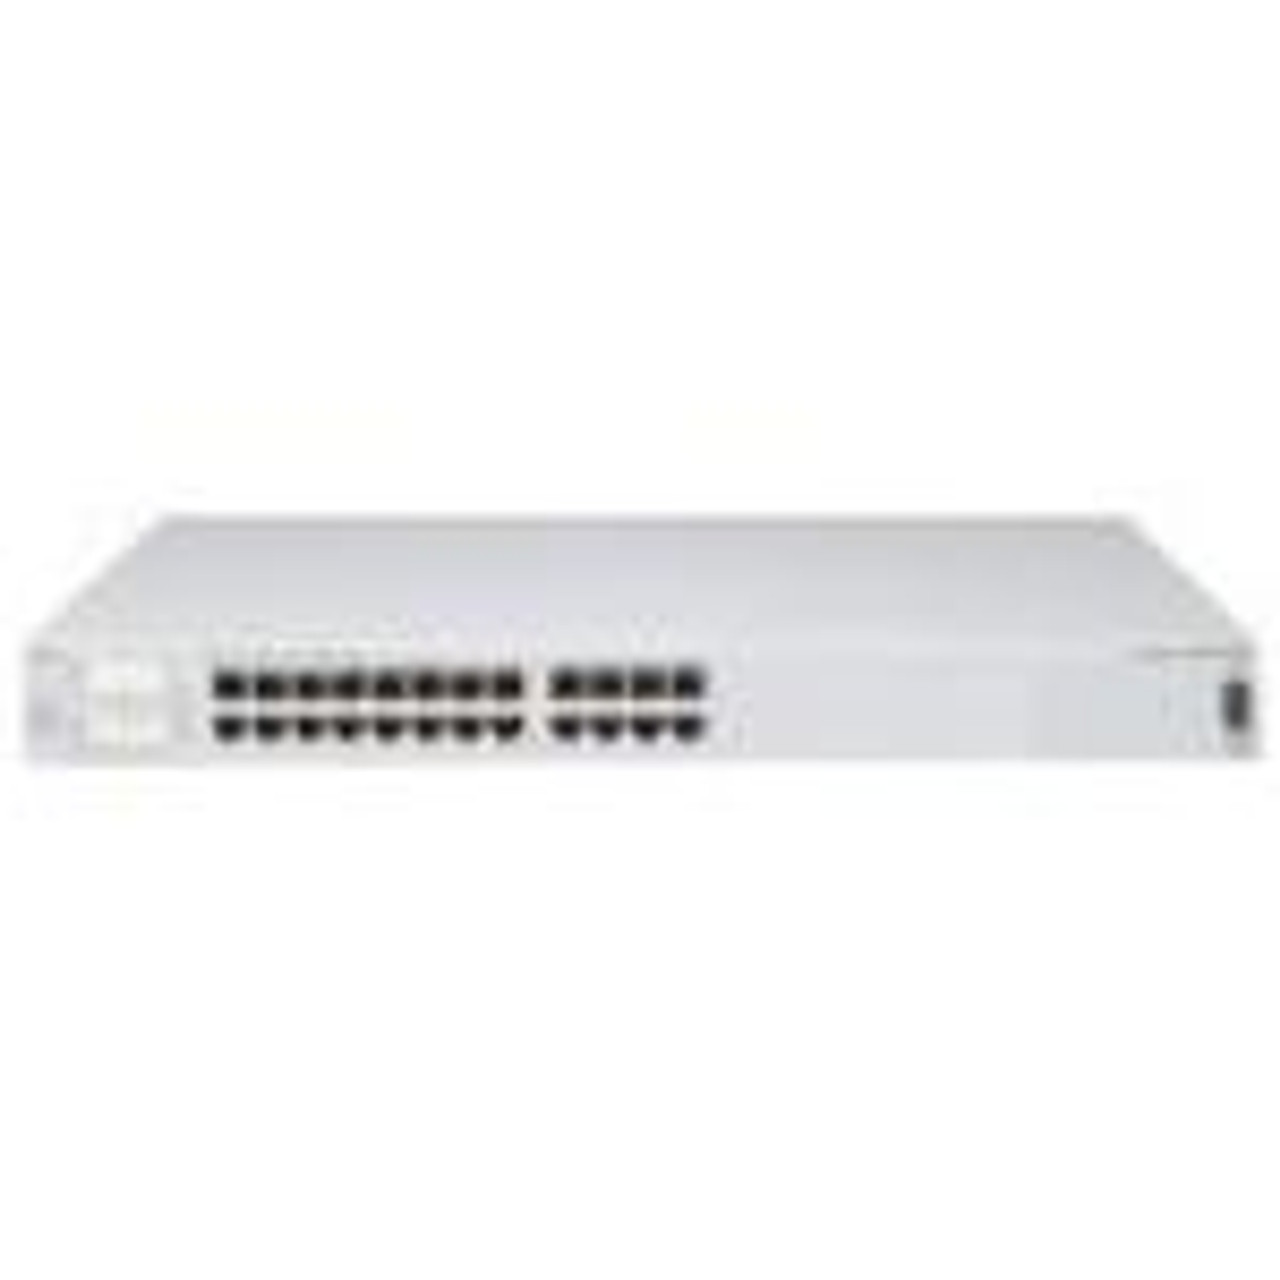 RMAL2012D37 Nortel BayStack 470-24T 24-Ports 10/100Mbps with 2 Built-in GBIC Ethernet Switch (Refurbished)